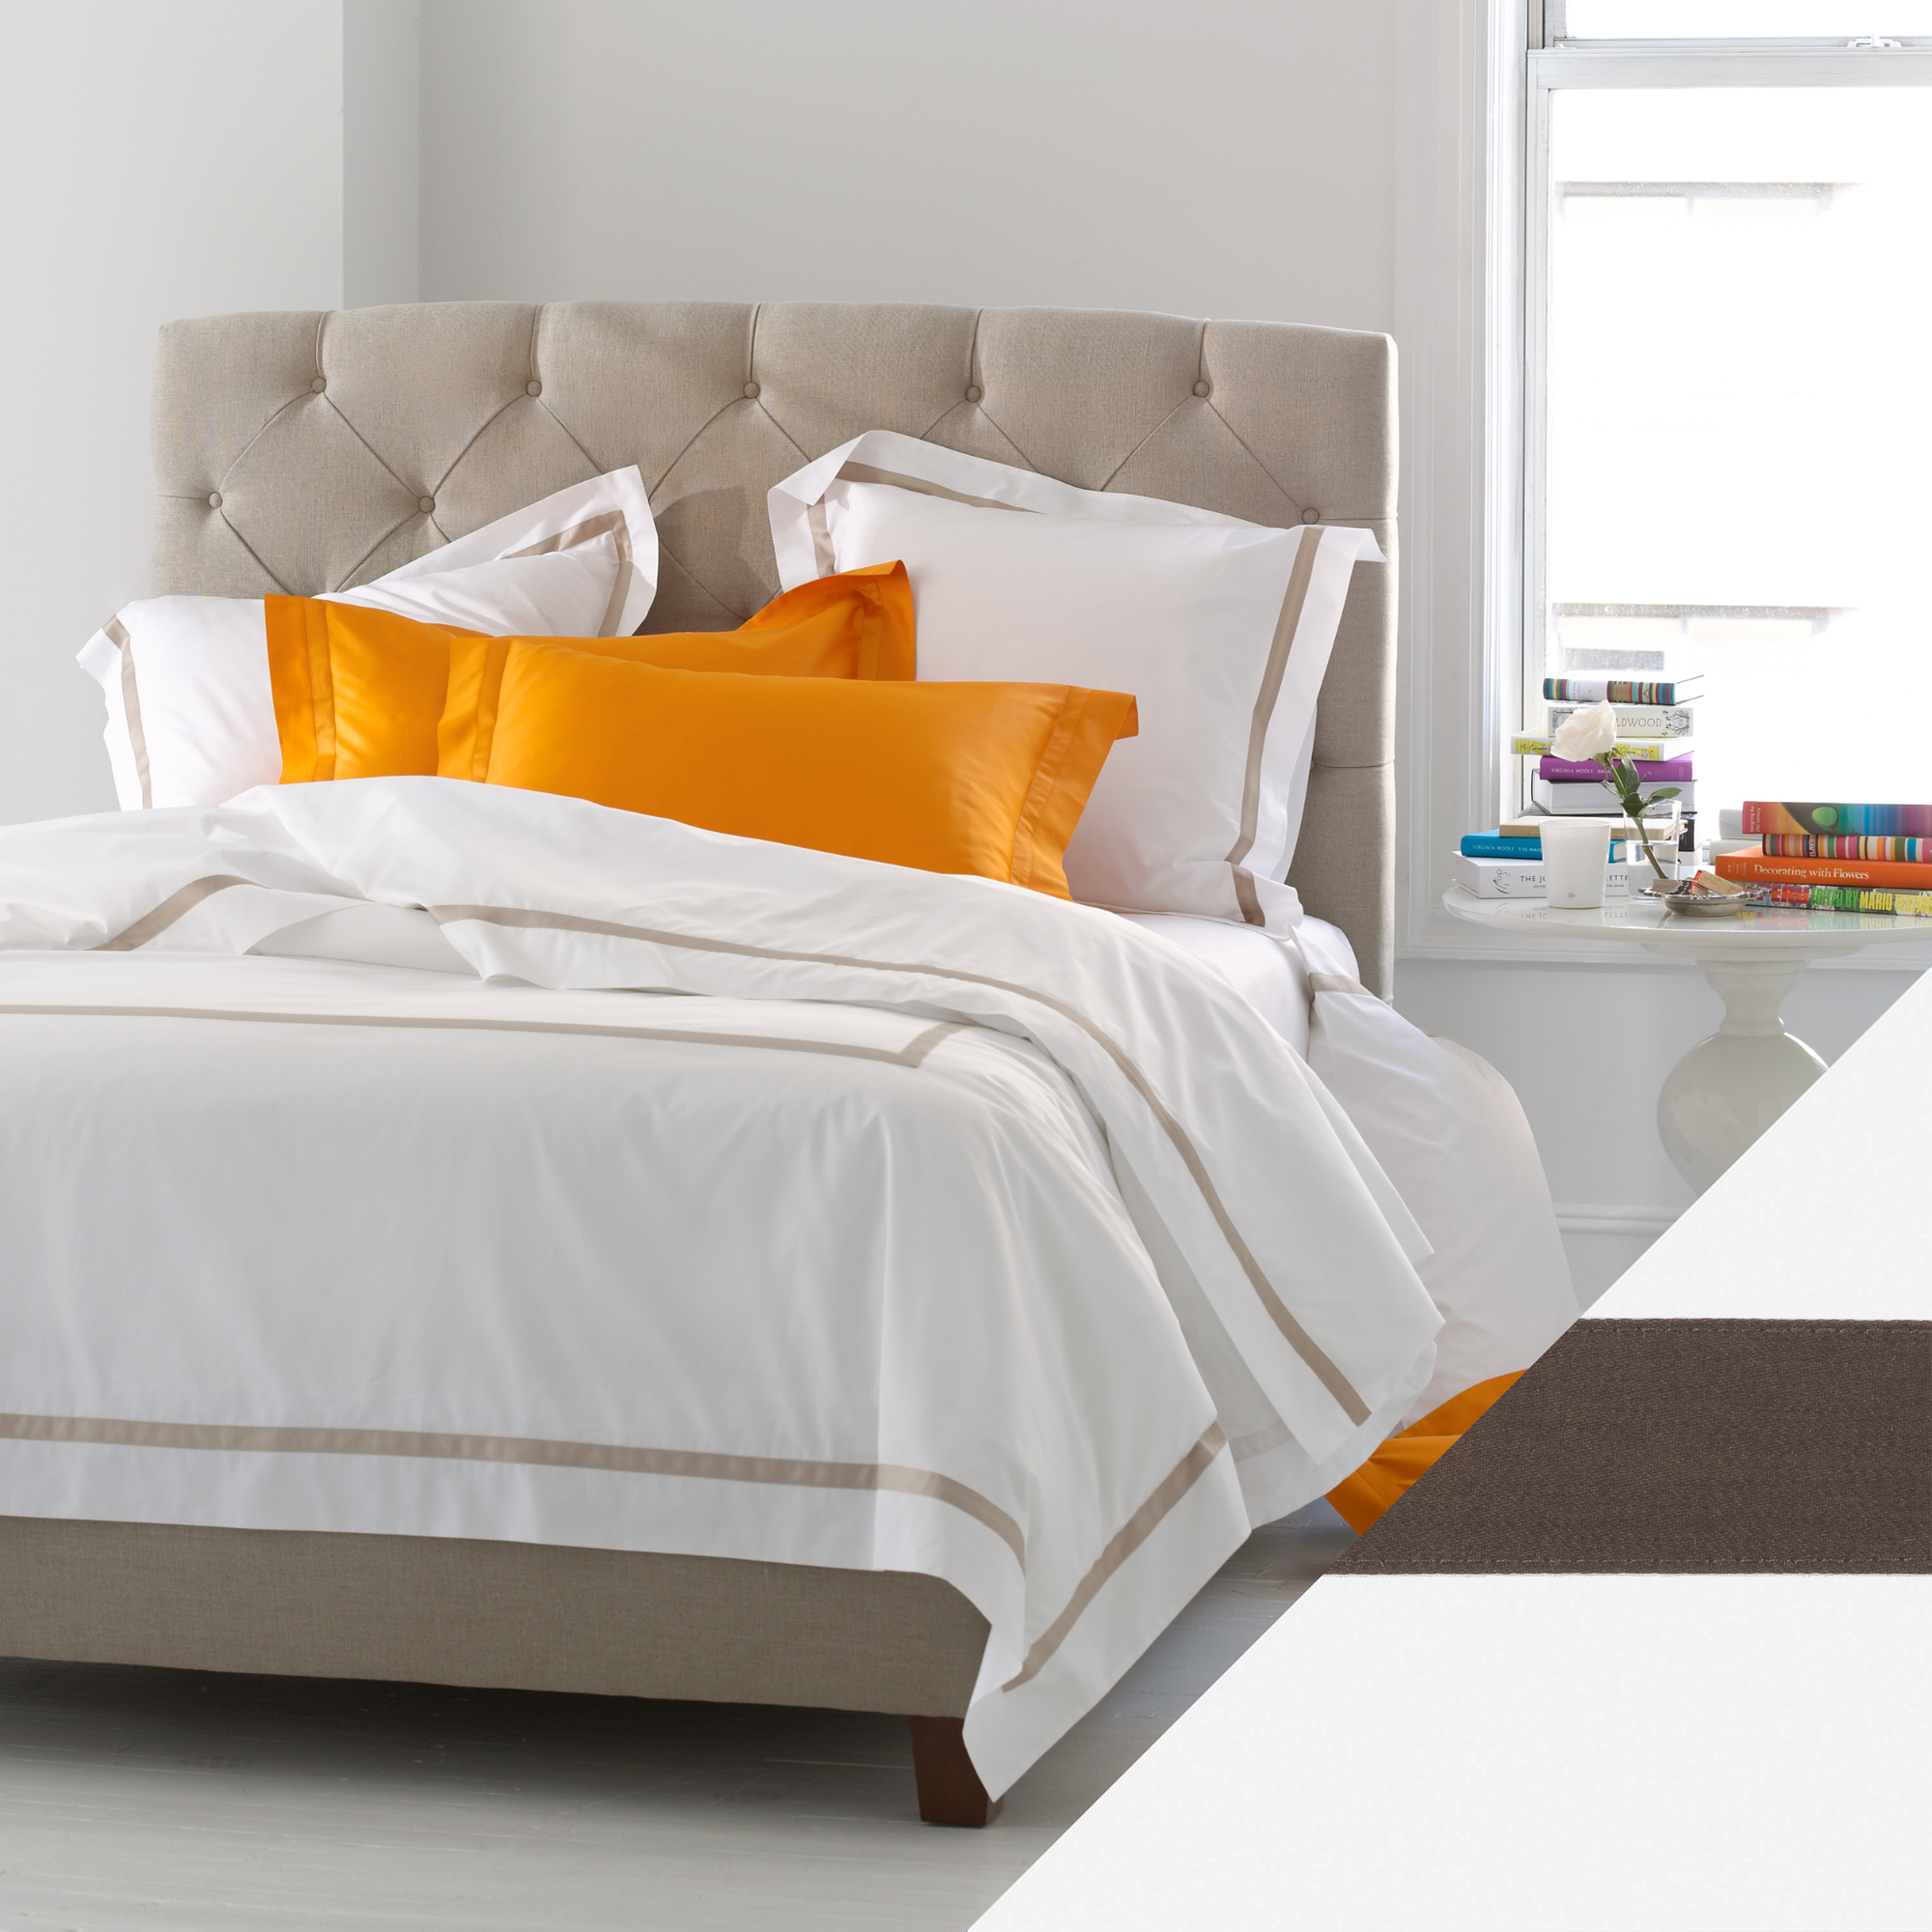 Full Bedding Of Matouk Lowell Collection with Sable Swatch